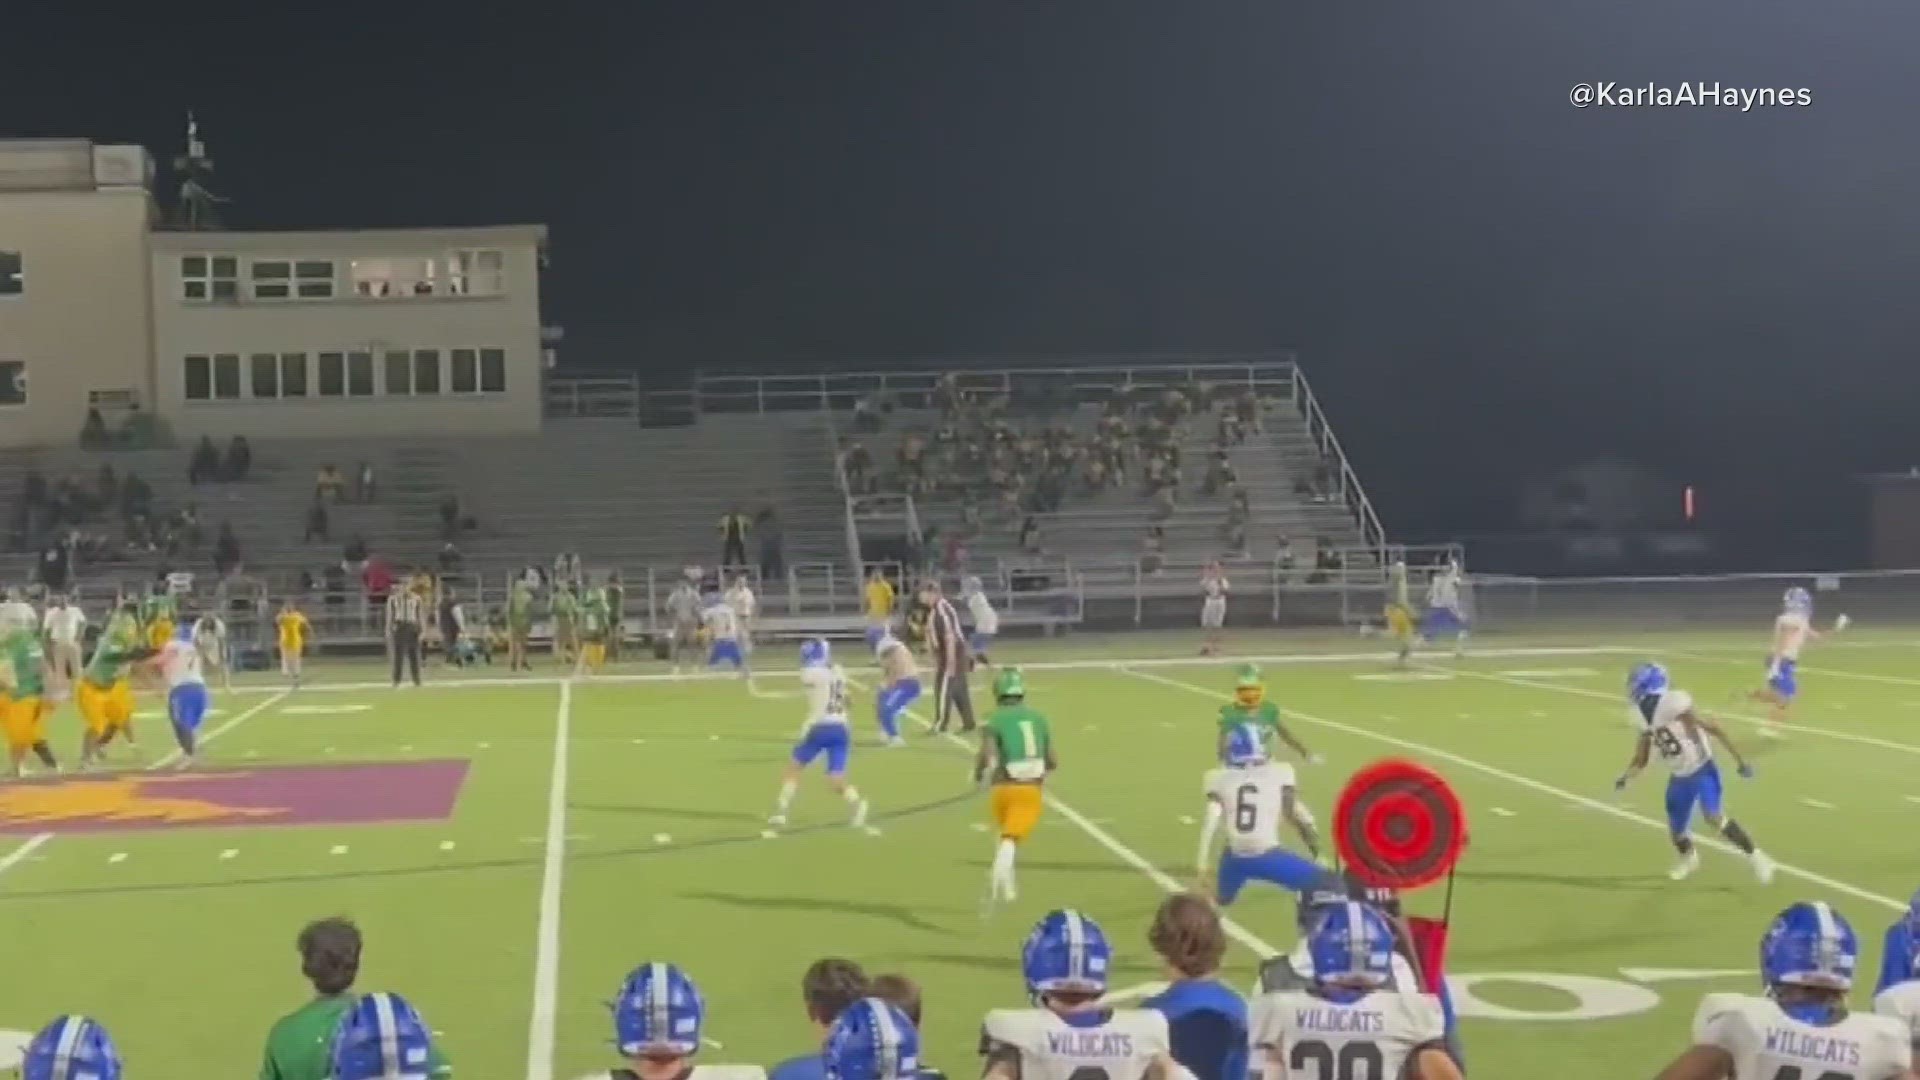 UIL reverses decision to suspend Whitney High School player after incident with referee, official 'removed from officiating' pending investigation